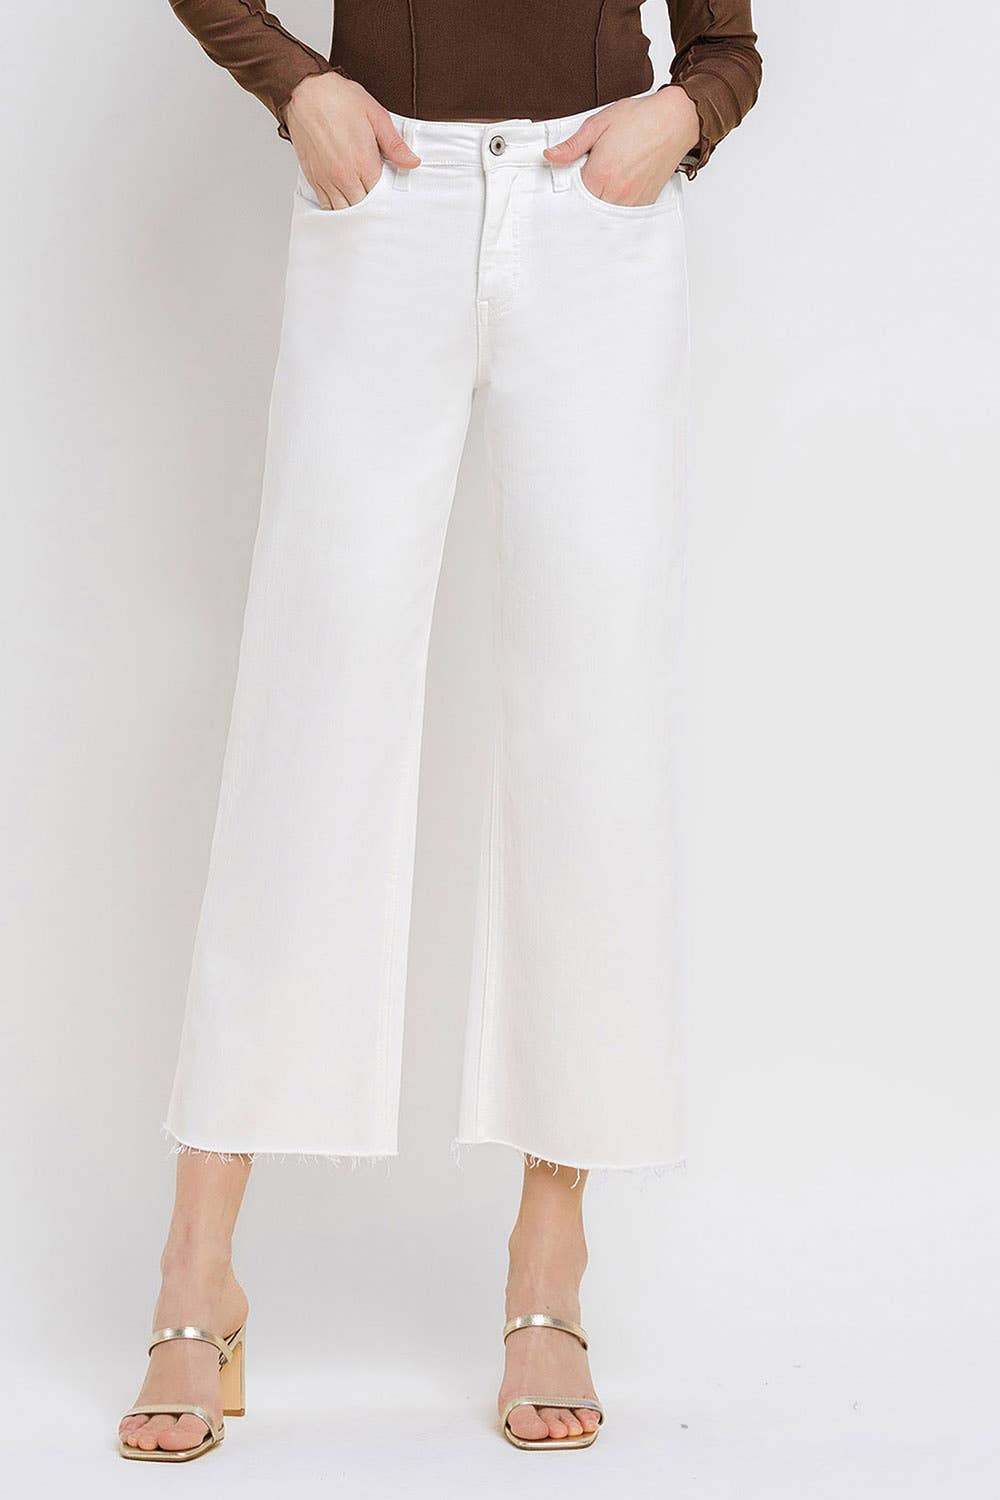 Optic White Crop Jeans